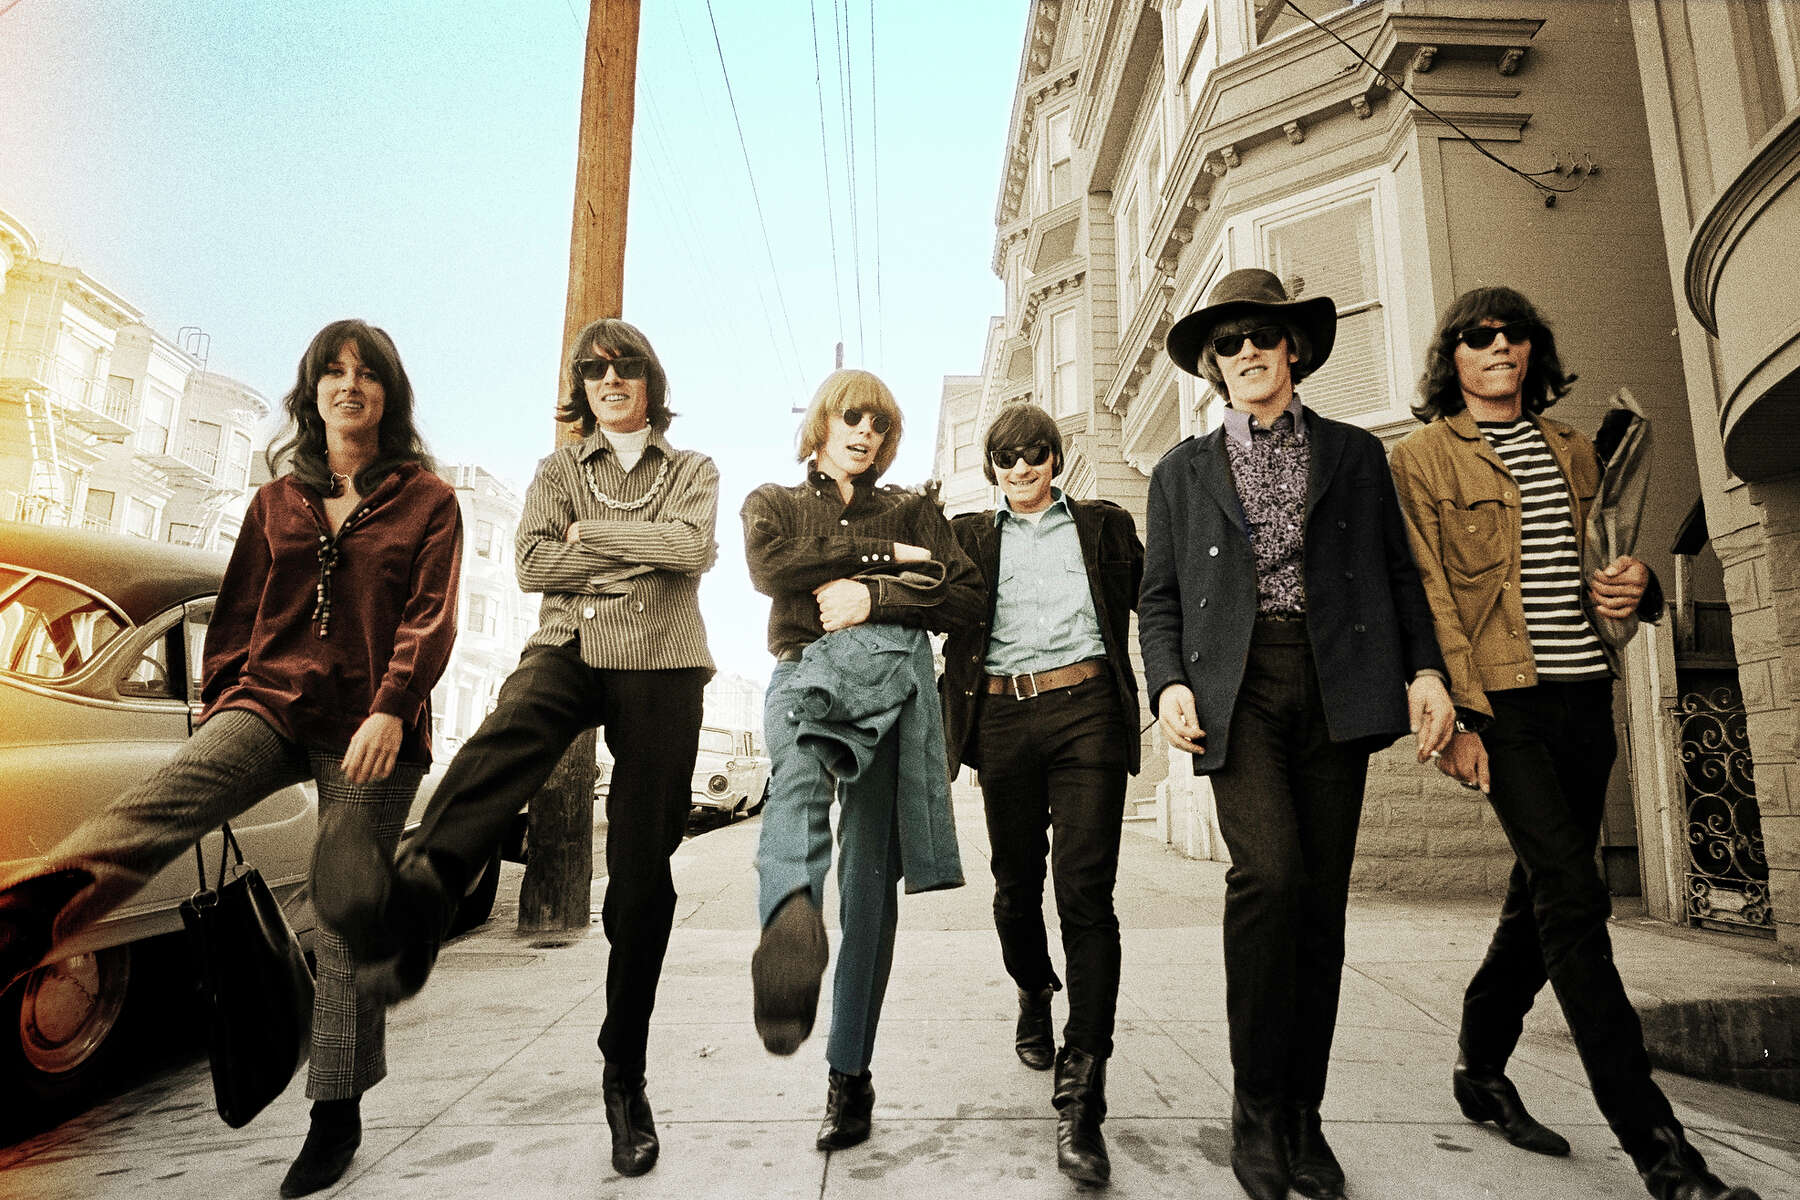 Jefferson Airplane launched the S.F. rock scene